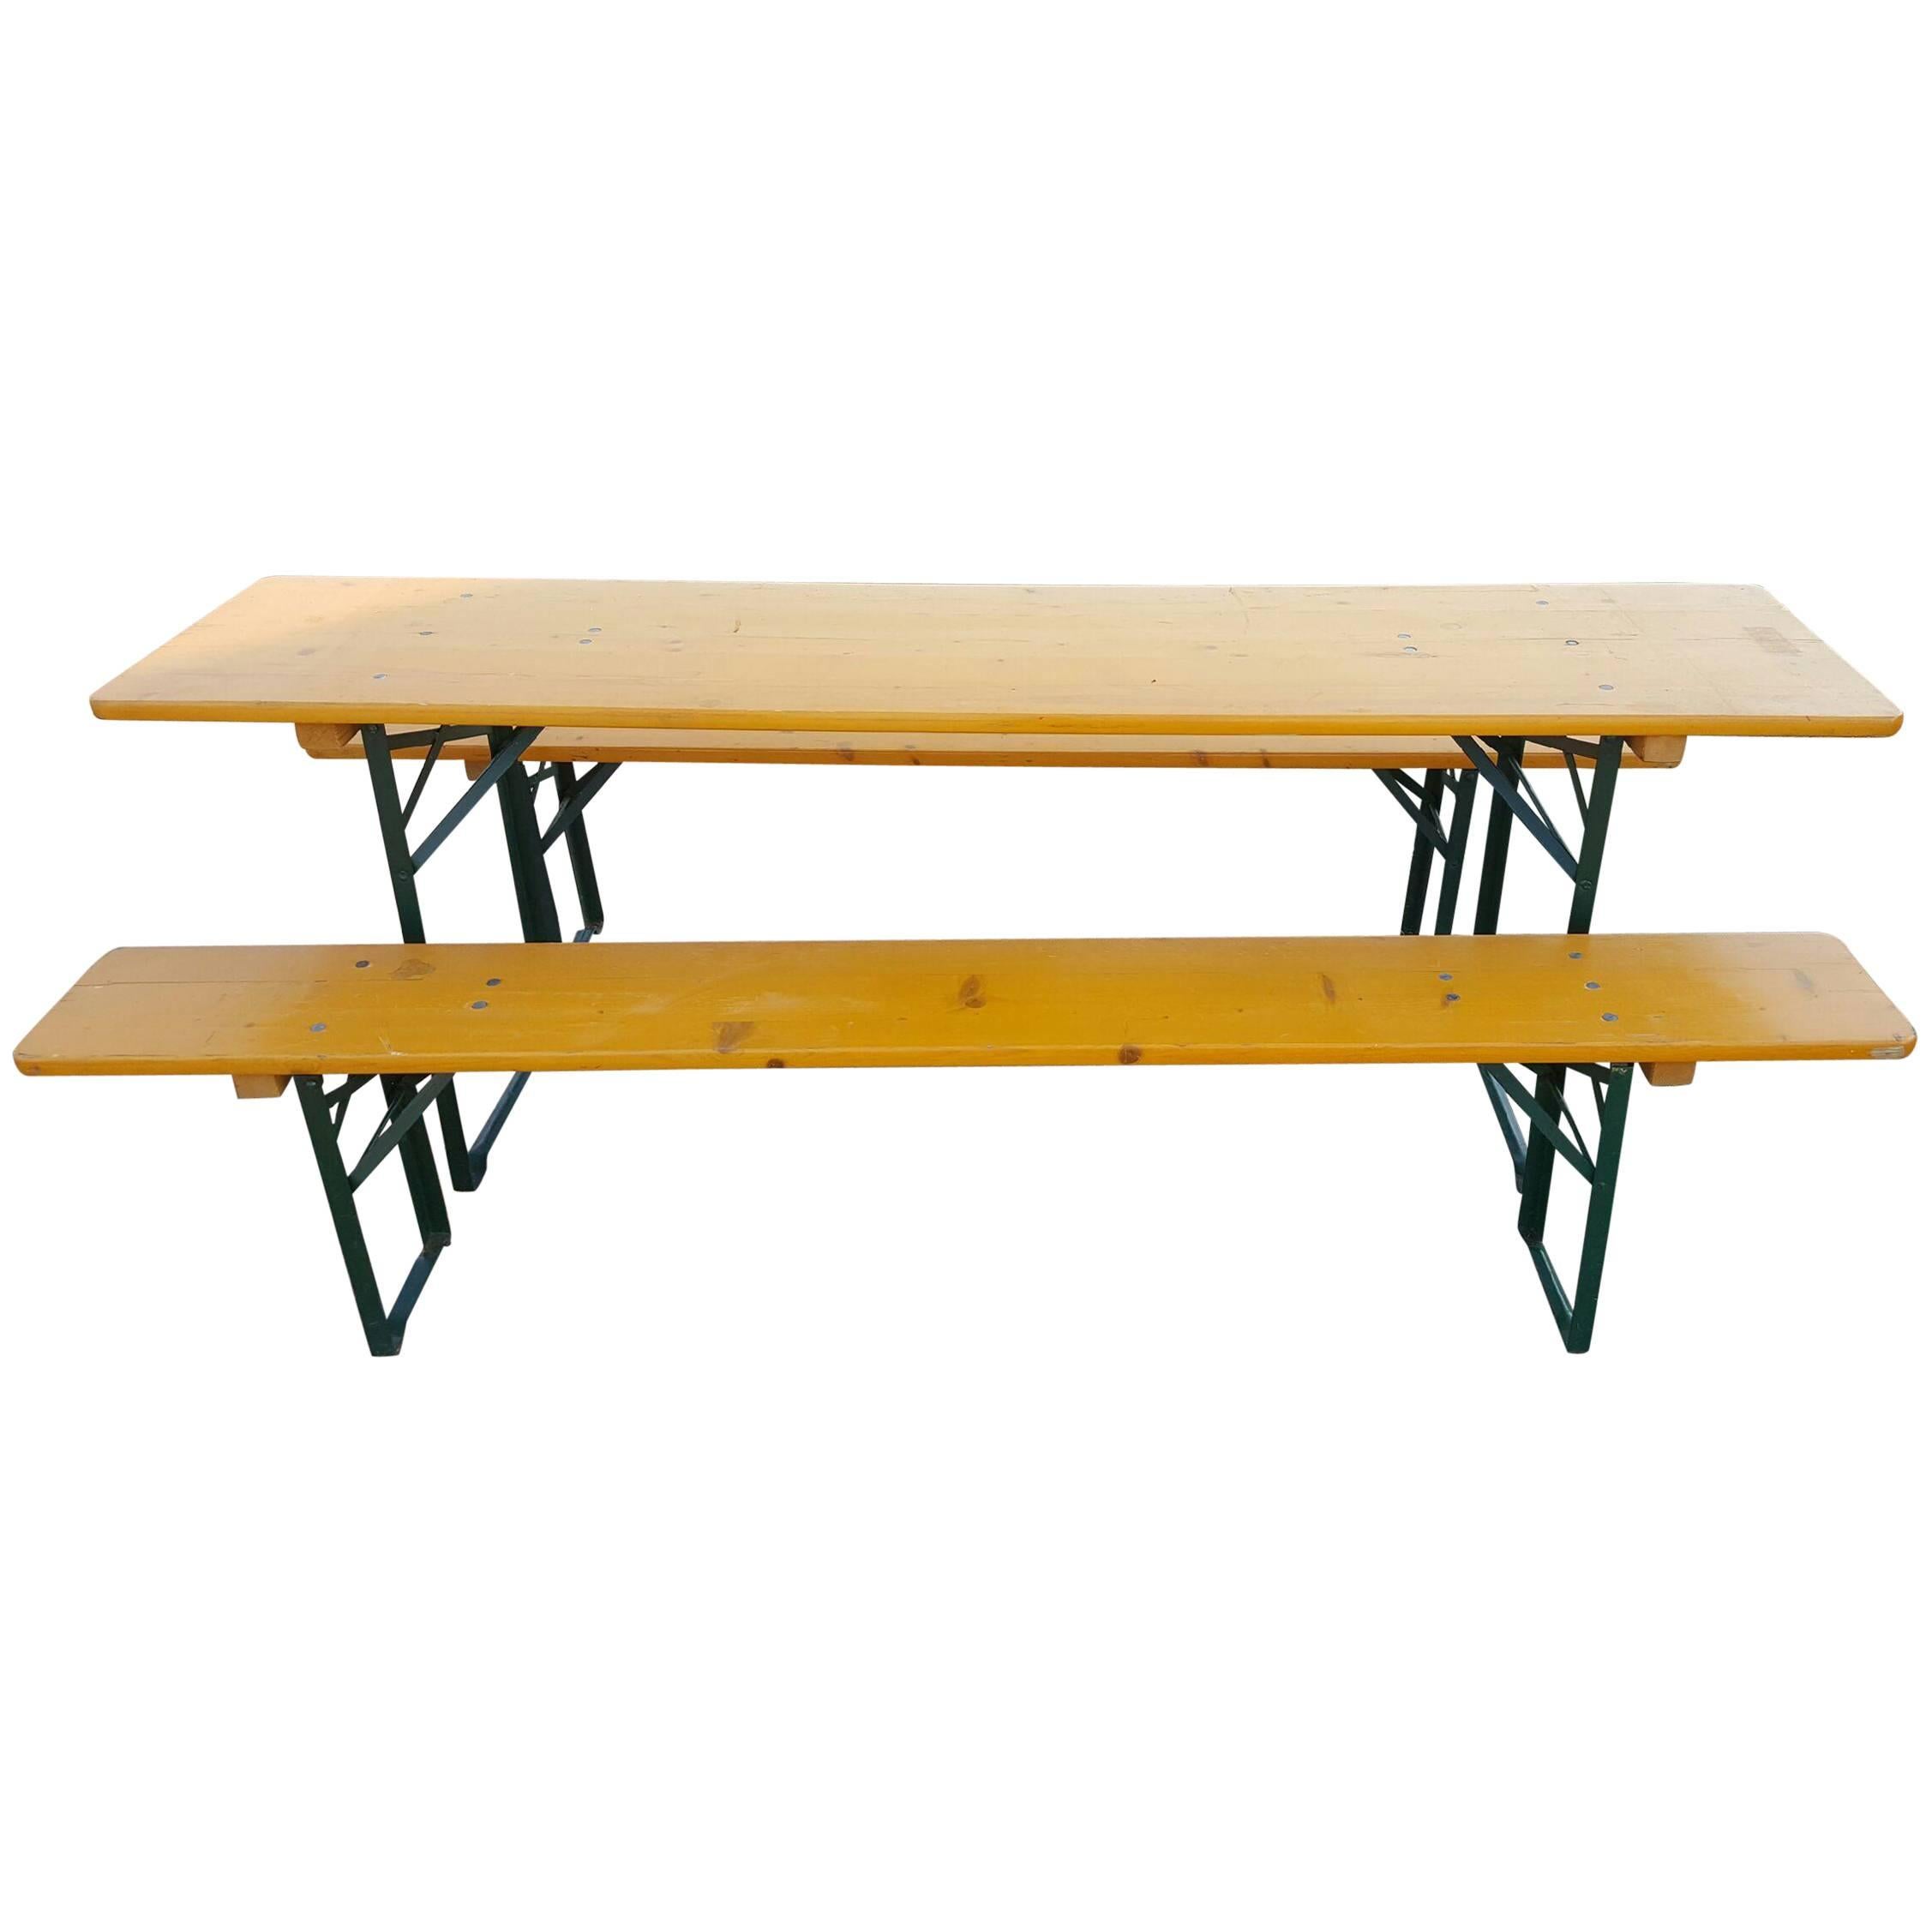 You receive (5) tables and 10 benches for the price listed plus free shipping! Authentic Oktoberfest picnic table sets from the legendary beer halls of Germany. Great for brew pubs, restaurants, pizzarias, ice cream shops, outdoor cafes, family